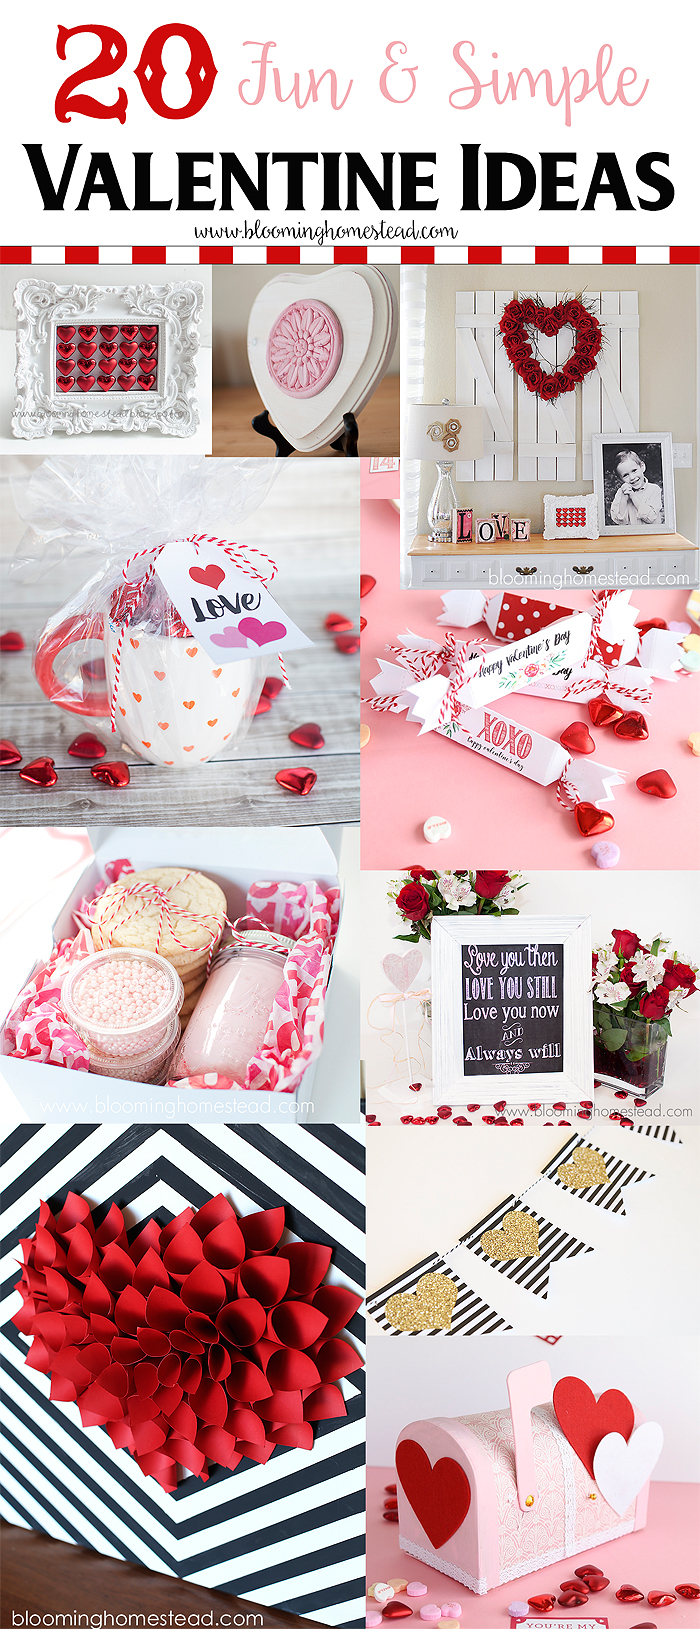 20 Simple and Fun Valentines Ideas including gift ideas, crafts, printables, and home decor!